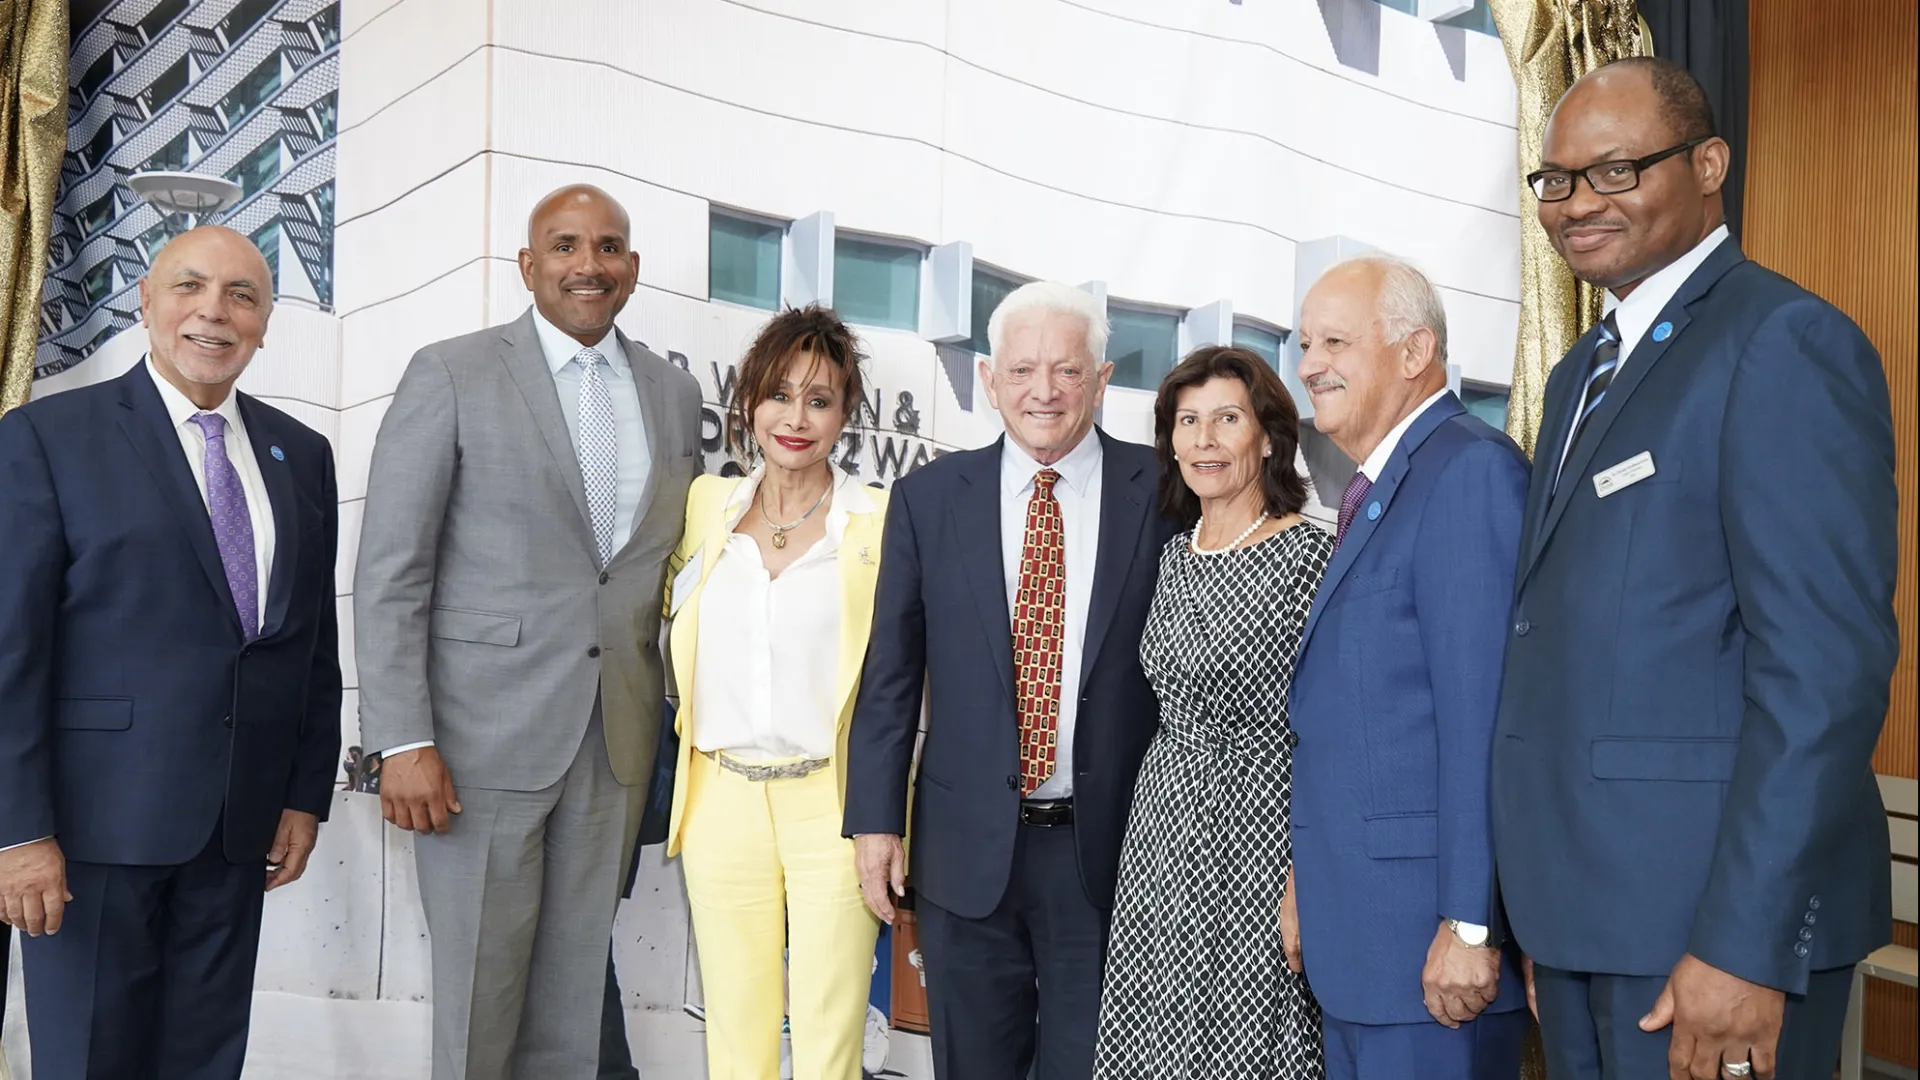 From left: Robert Nava, CSUSB vice president of University Advancement; Rafik Mohamed, interim provost and vice president of Academic Affairs; Judy Rodriguez Watson; James R. Watson; Evy Morales; CSUSB President Tomás D. Morales; and Chinaka DomNwachukwu, dean, Watson College of Education.